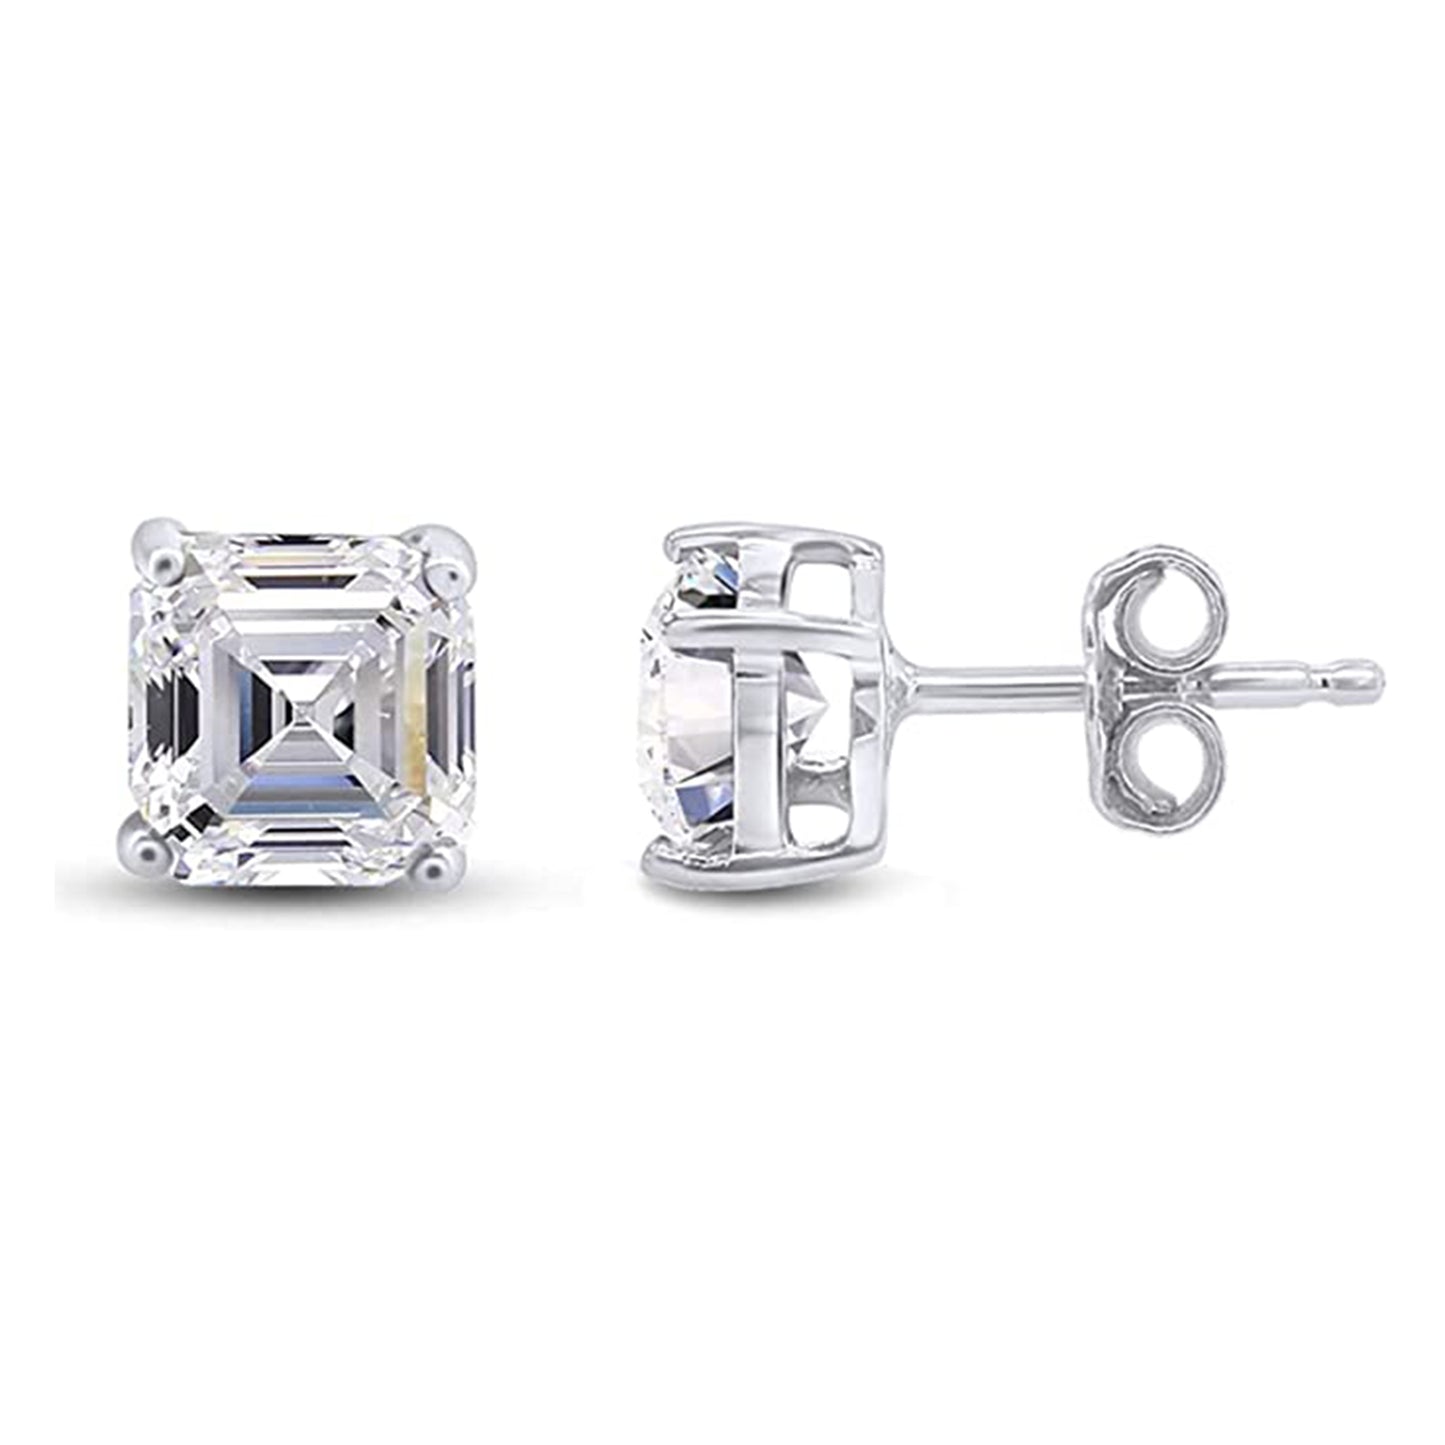 Load image into Gallery viewer, 2 Carat Asscher Cut Cubic Zirconia Solitaire Stud Earrings for Women in 925 Sterling Silver
